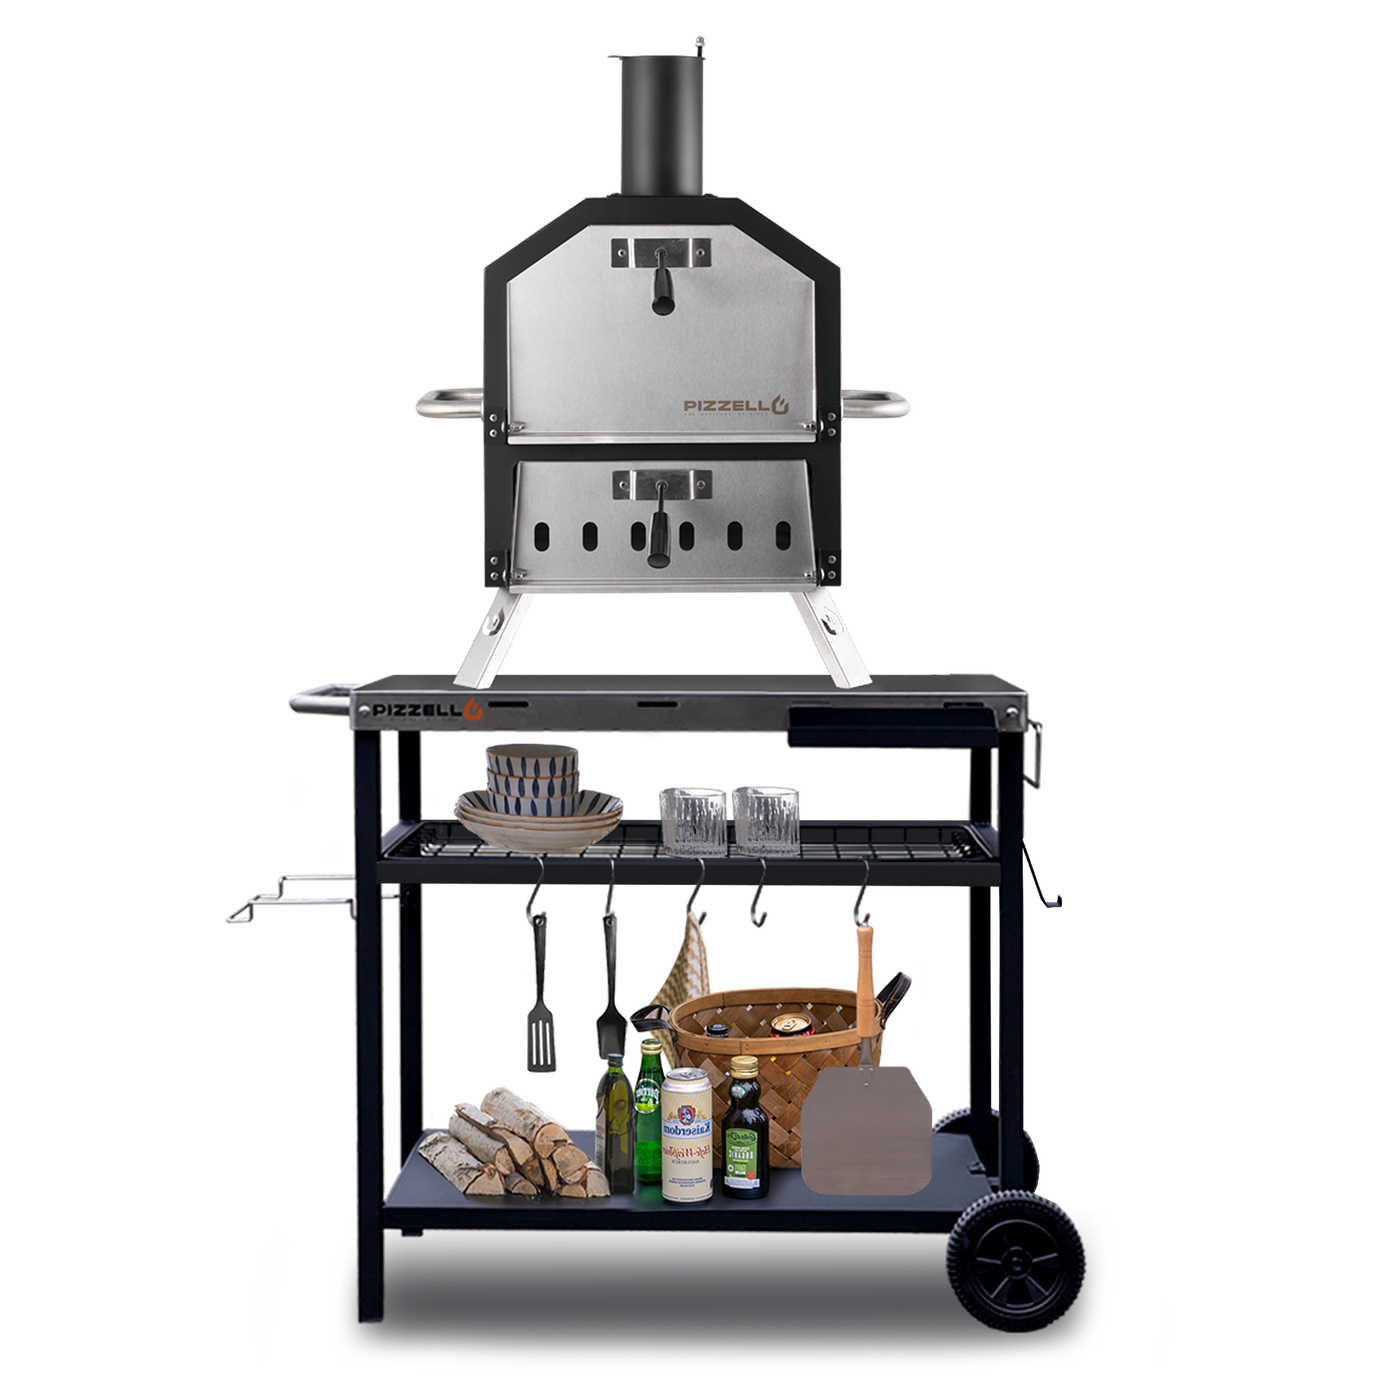 A portable Pizzello Grande outdoor 2-layer pizza oven on a stand with accessories and firewood, featuring precise temperature control and a large cooking area.